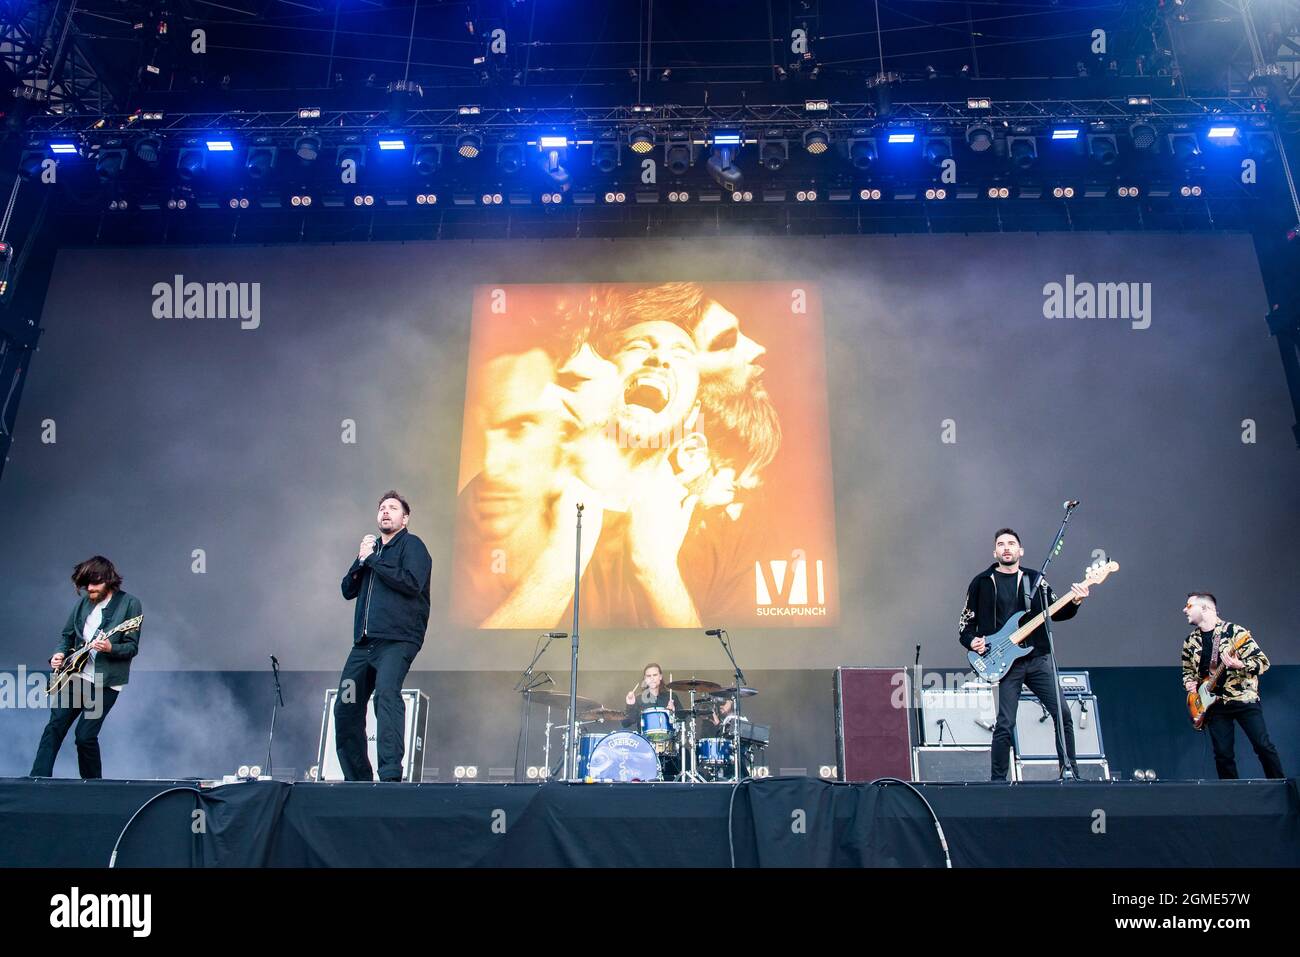 Newport, Isle of Wight, UK, Friday, 17th September 2021 You Me At Six perform live at the Isle of Wight festival Seaclose Park. Credit: DavidJensen / Empics Entertainment / Alamy Live News Stock Photo